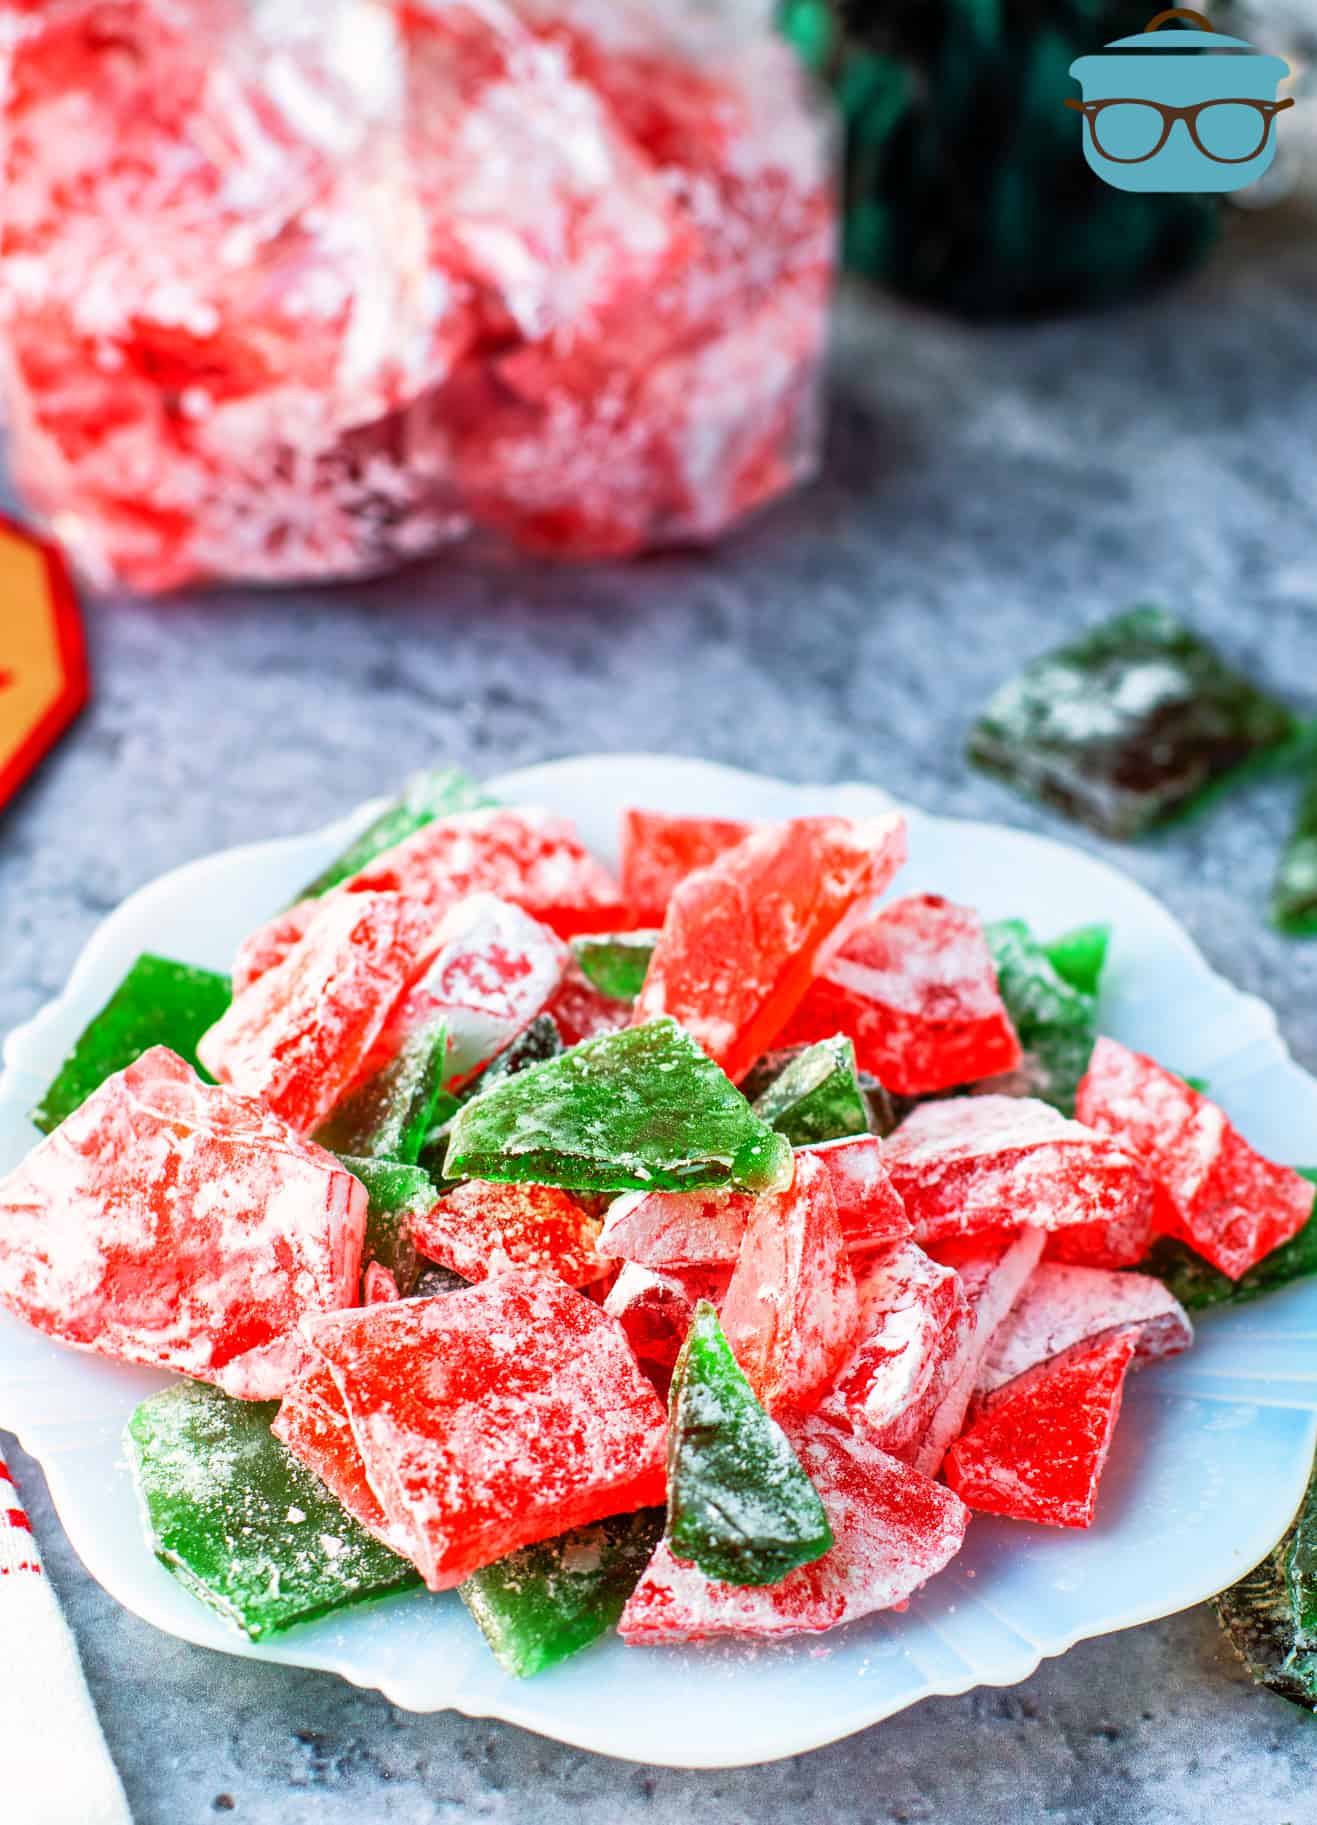 pieces of red and green rock candy shown on a white plate with a bag od red candy in the background.